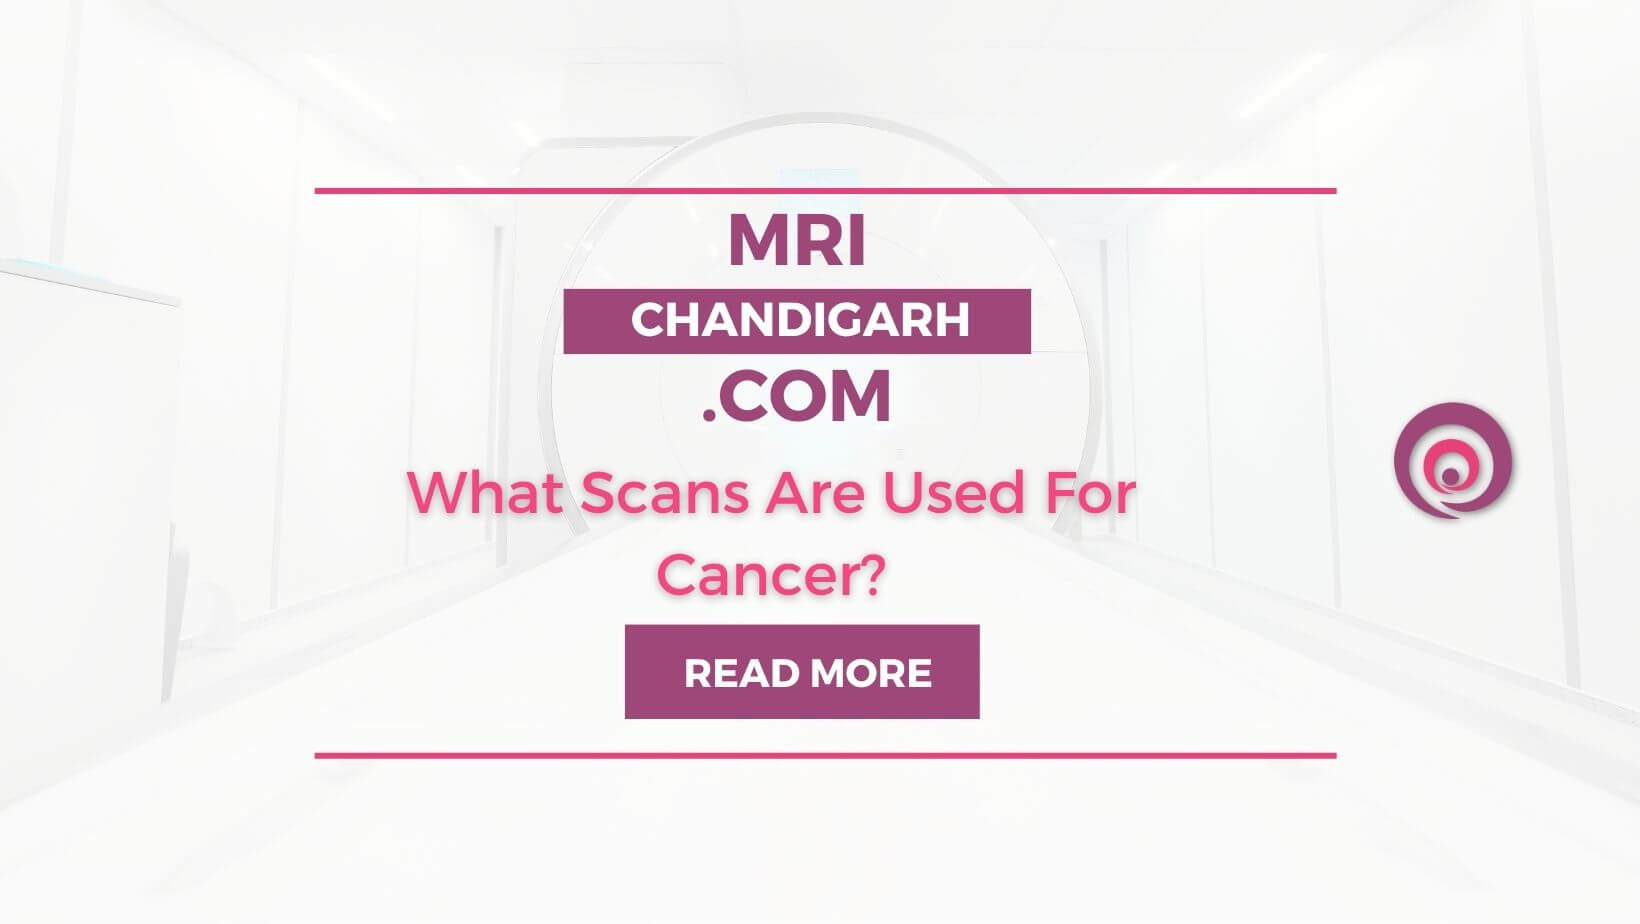 What Scans Are Used For Cancer?